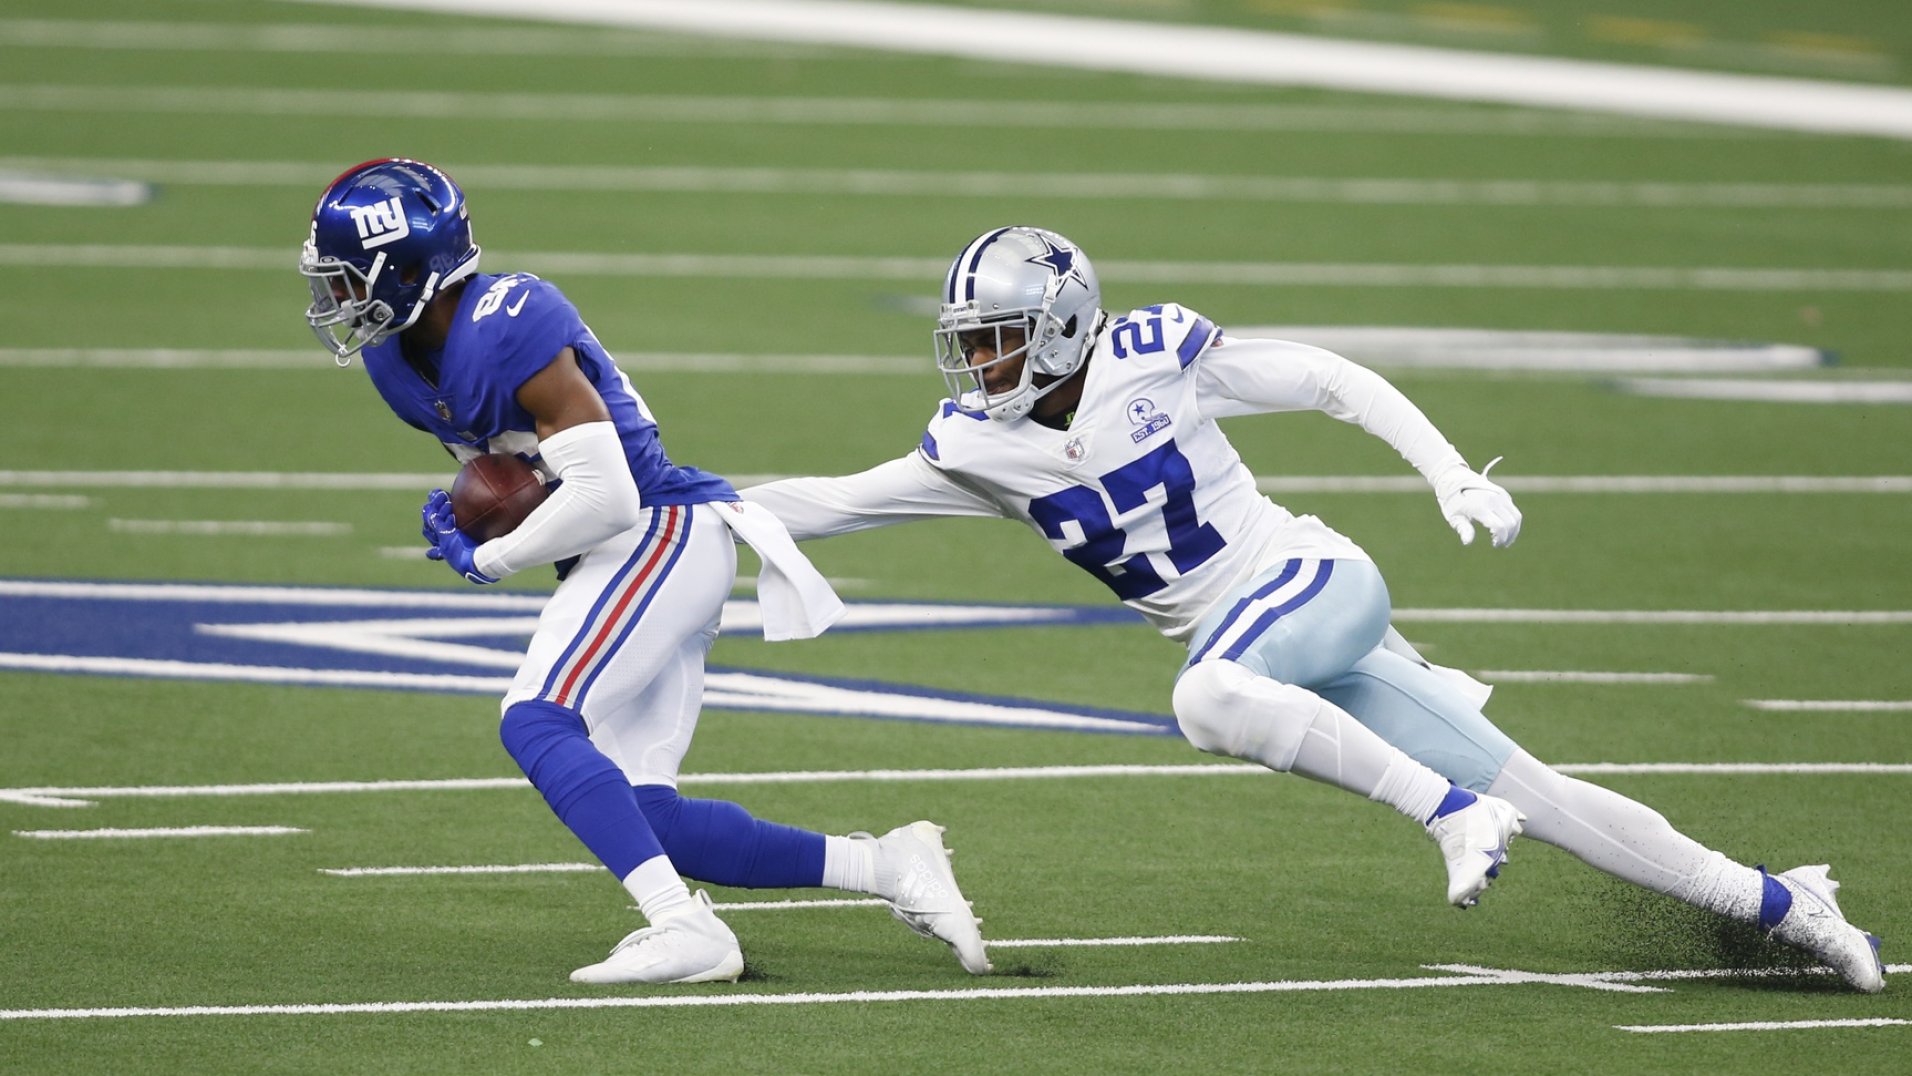 The Dallas Cowboys highlight why defenses should prioritize coverage